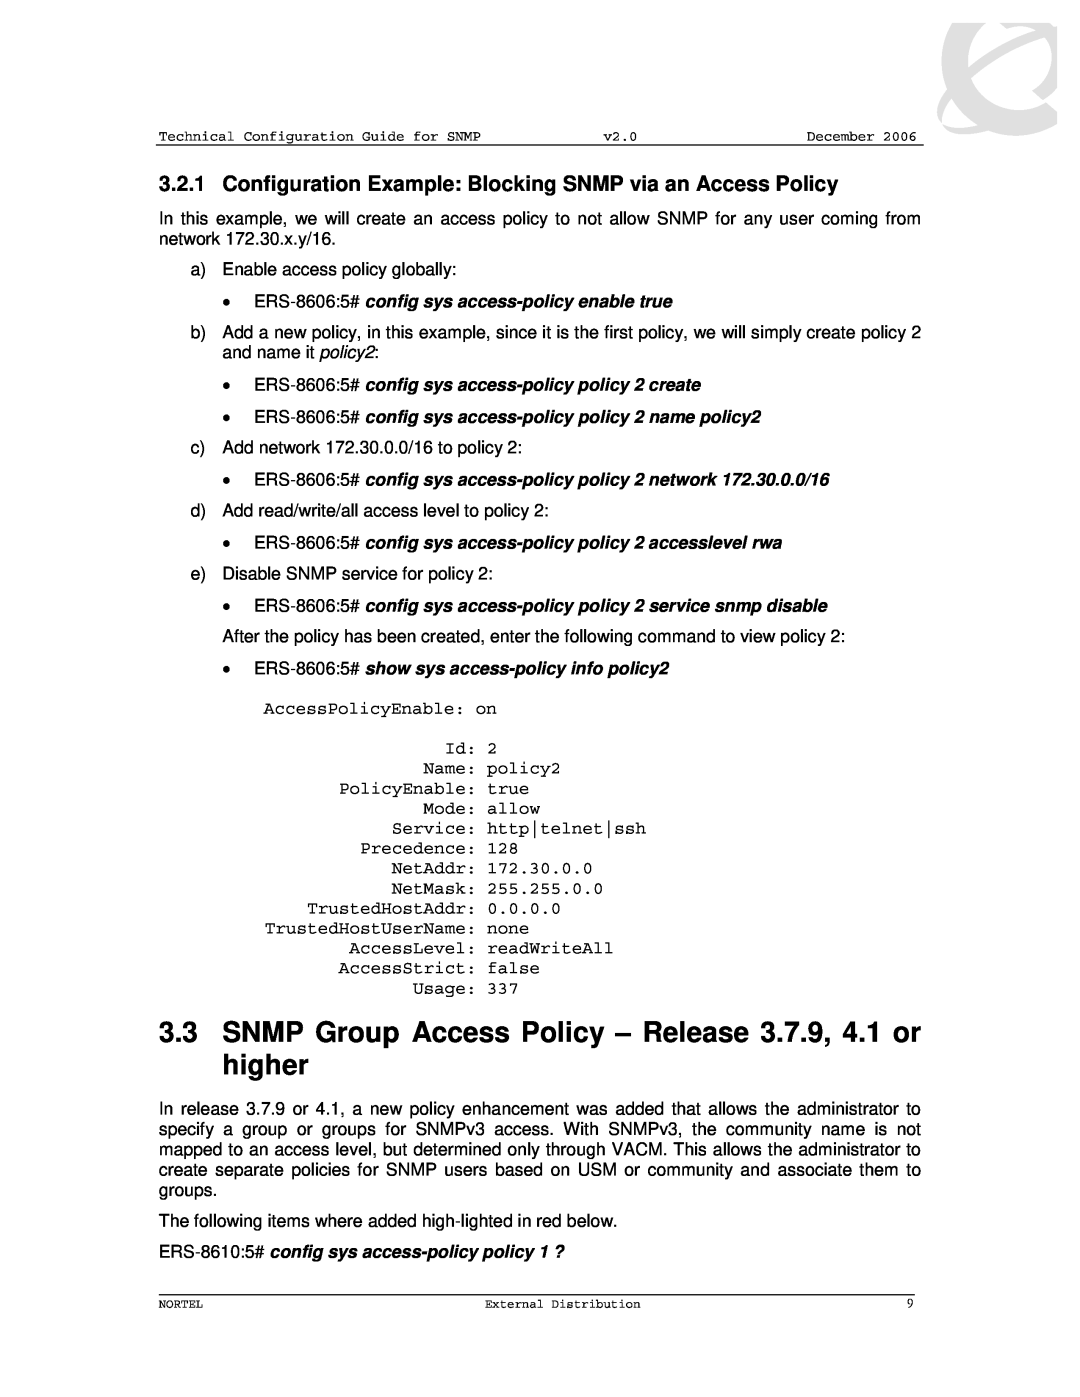 Nortel Networks 8600 manual SNMP Group Access Policy - Release 3.7.9, 4.1 or higher 